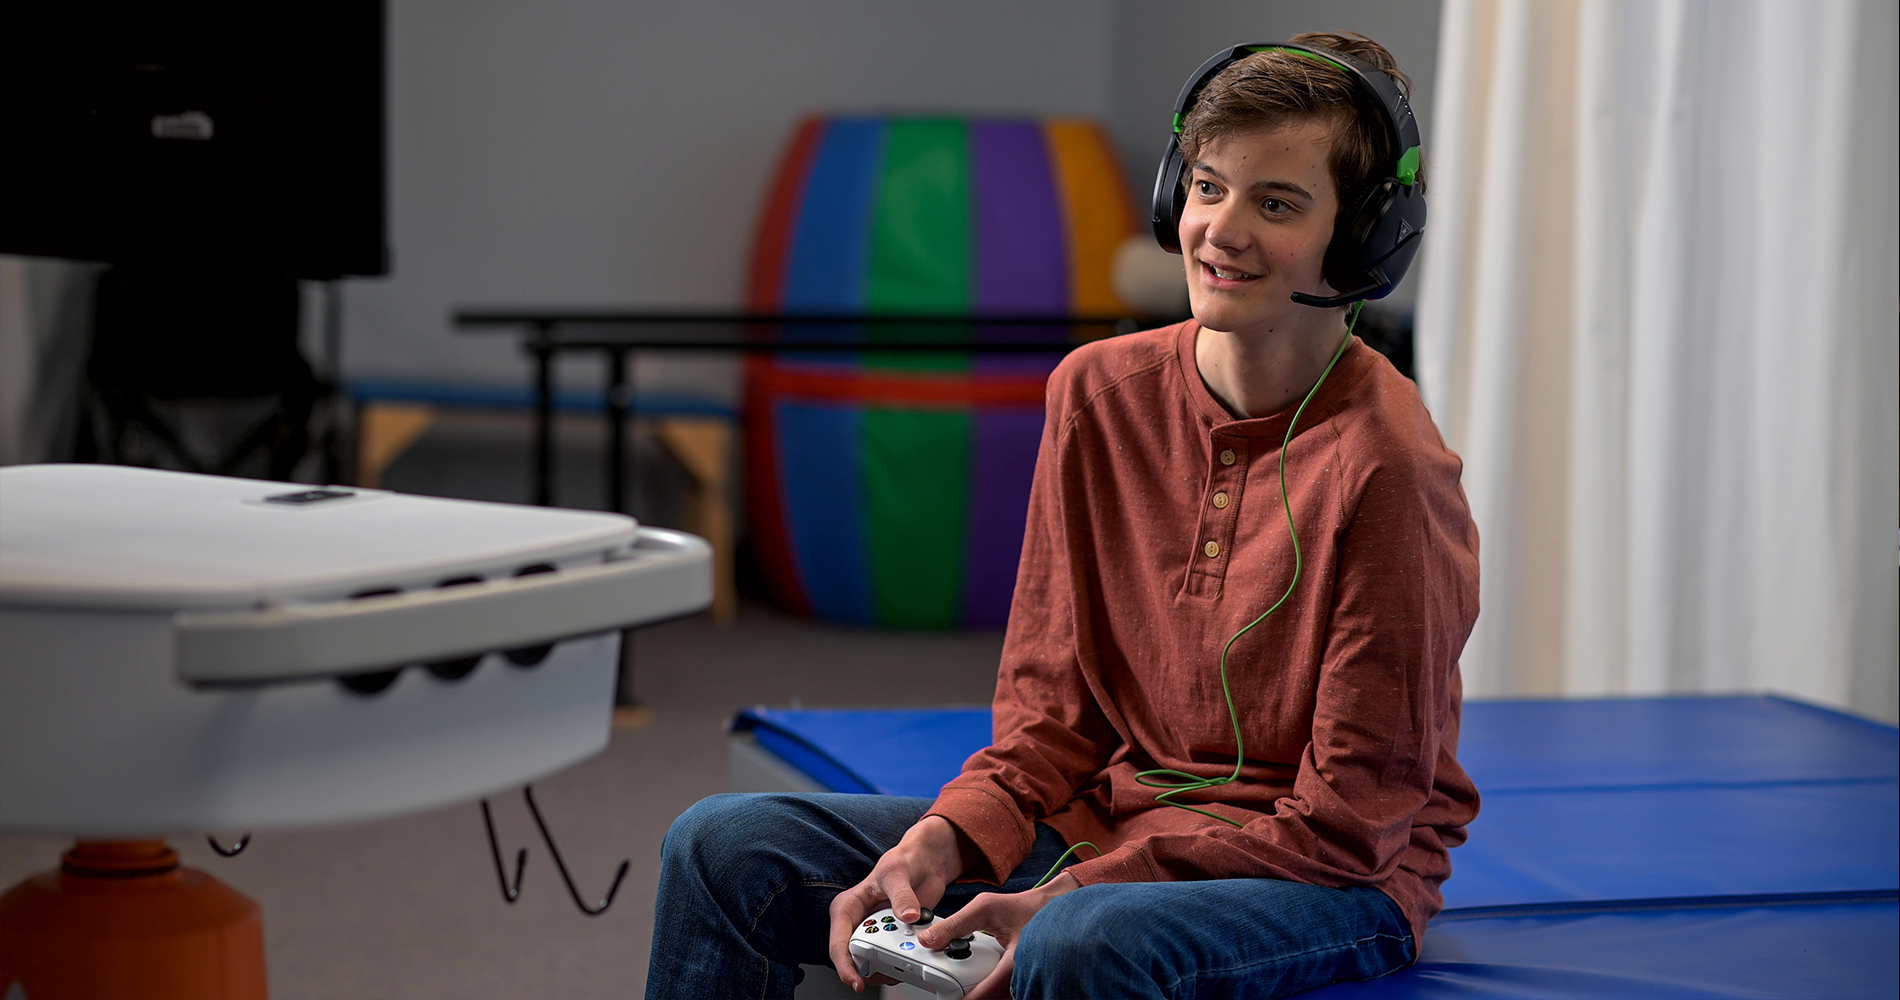 A young man sitting on a bench with a red shirt and headphones, holding a controller in his hands.